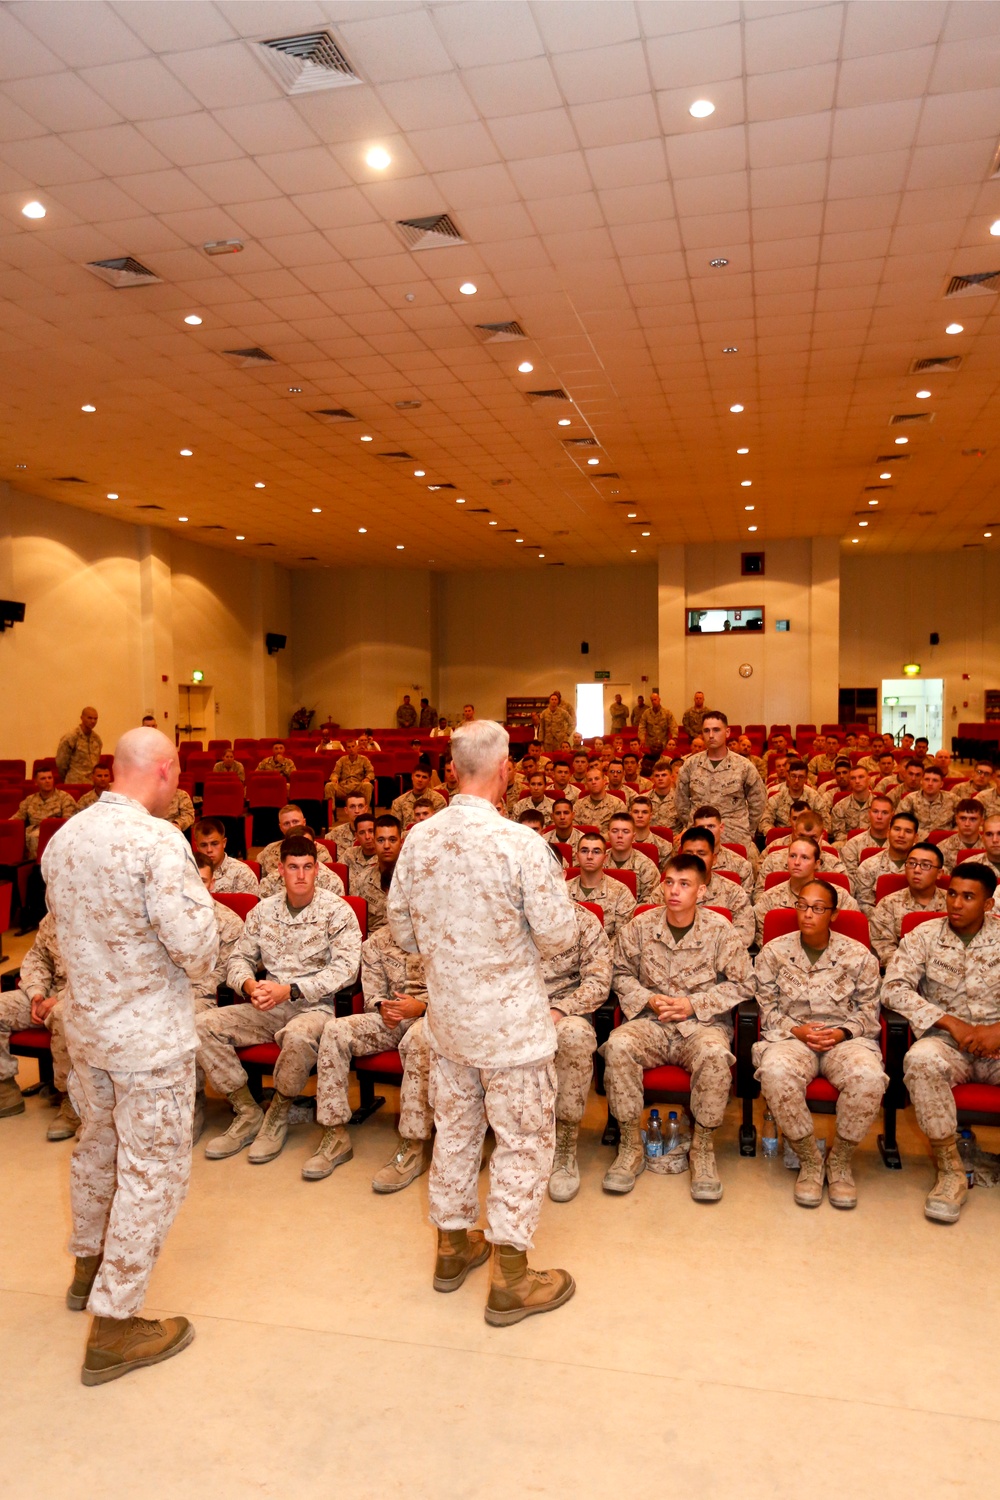 Commandant and Sergeant Major of the Marine Corps in Kuwait